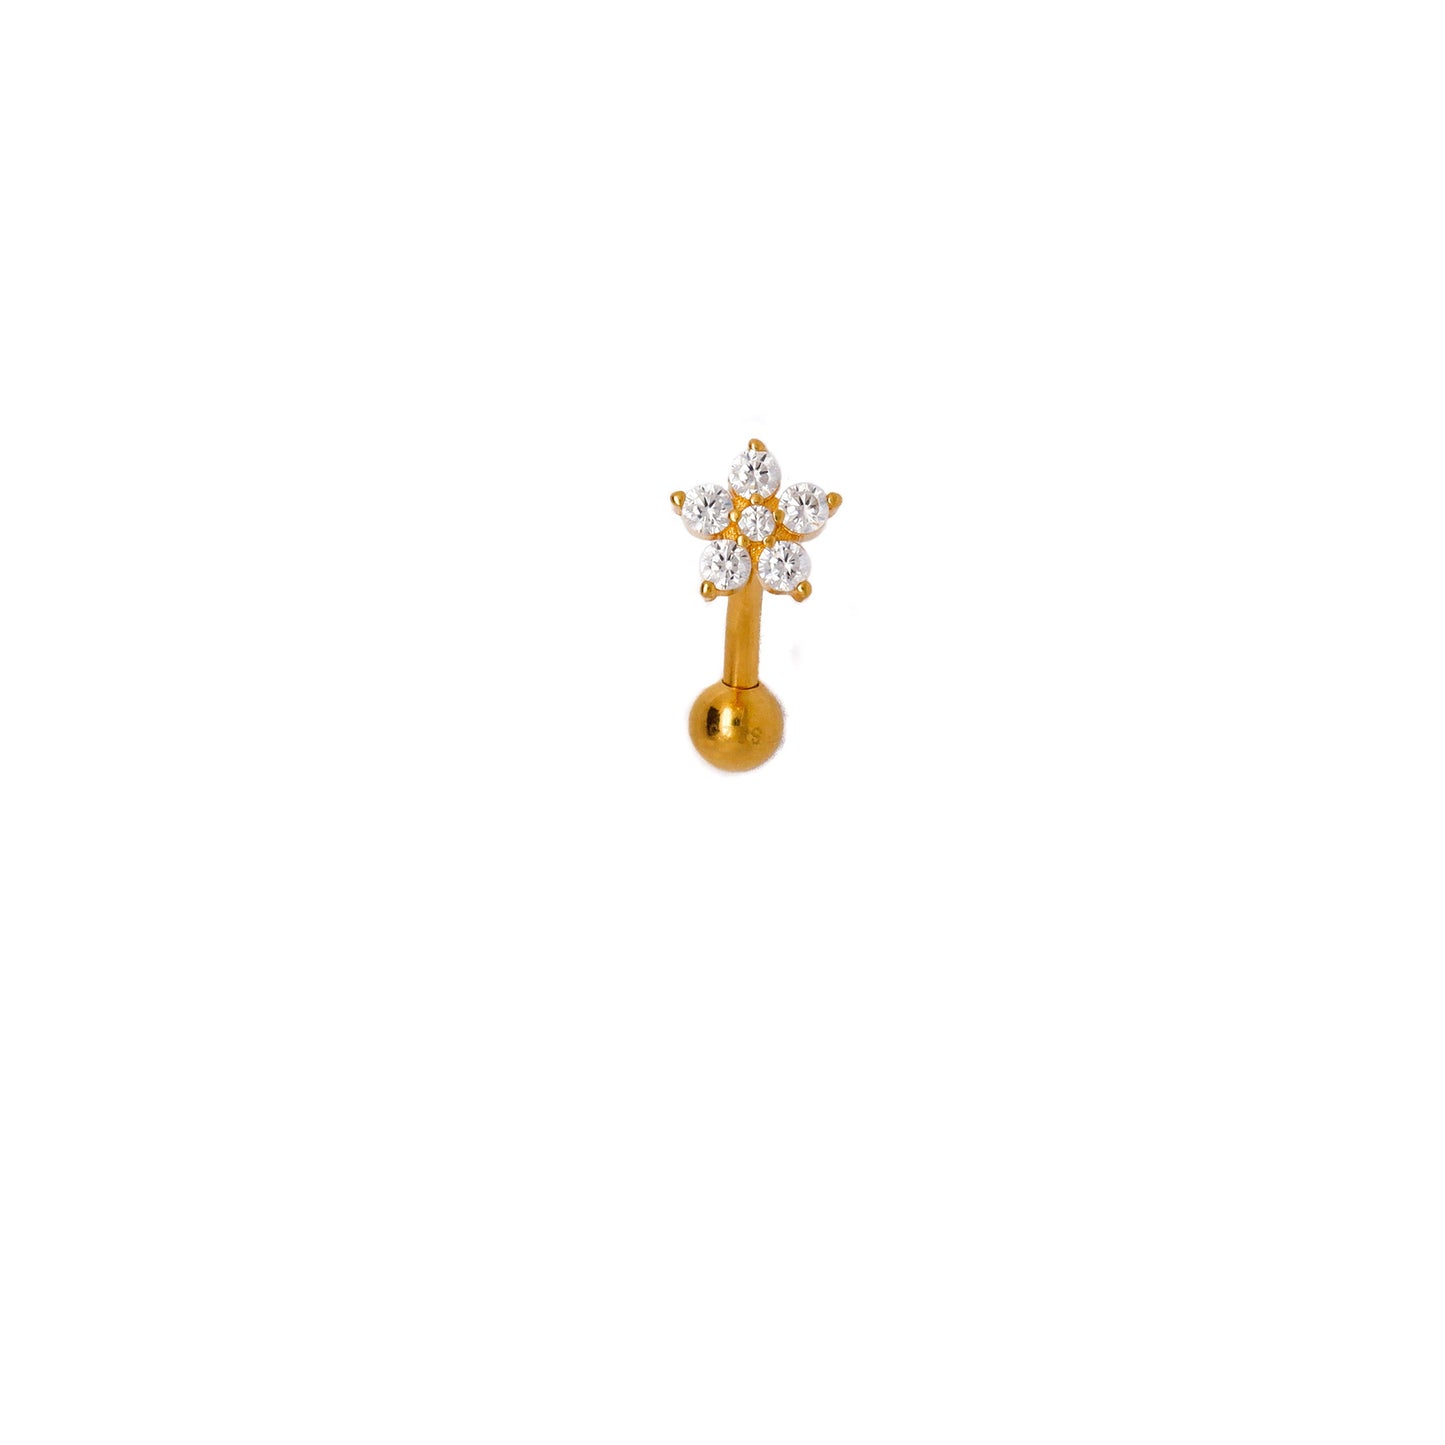 Vermeil | 24k Gold Coated 925 Silver 16G 14G Petite Flower Reverse Belly Ring | 6mm 1/4" 8mm 5/16" 10mm 3/8" 12mm 15/32" - Sturdy South